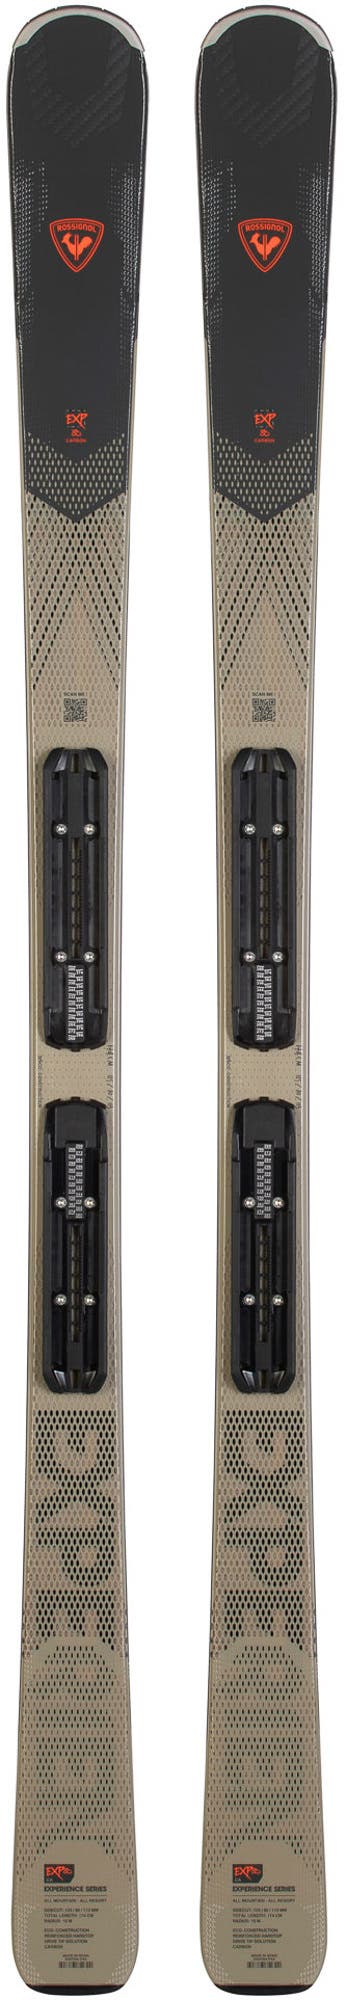 Rossignol - EXPERIENCE 80 CARBON XPRESS - Image 7